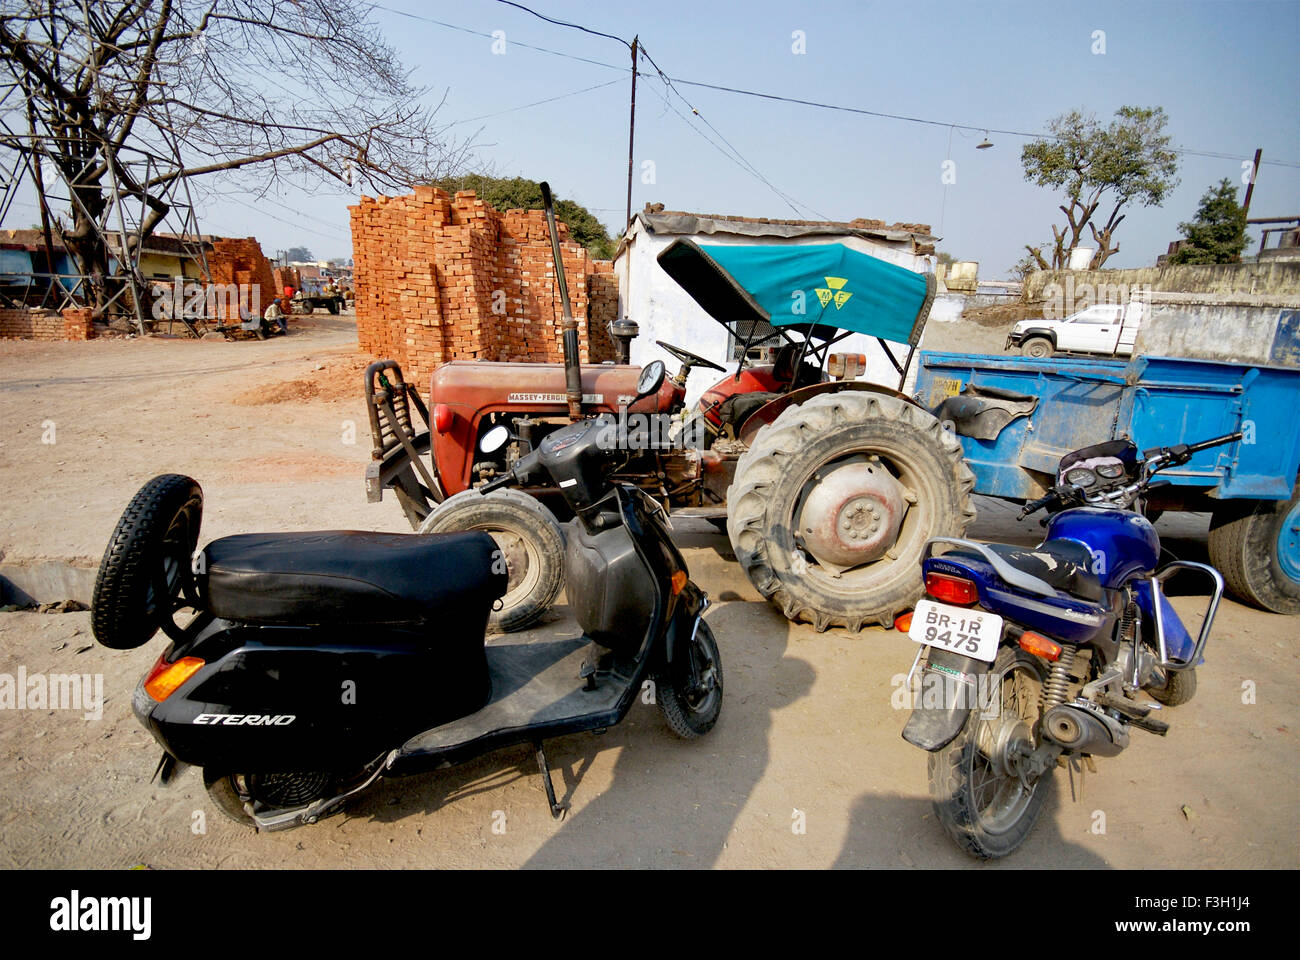 A scooter; motorcycle and a tractor parked on the road side ; Dehradun ; Uttaranchal ; India Stock Photo